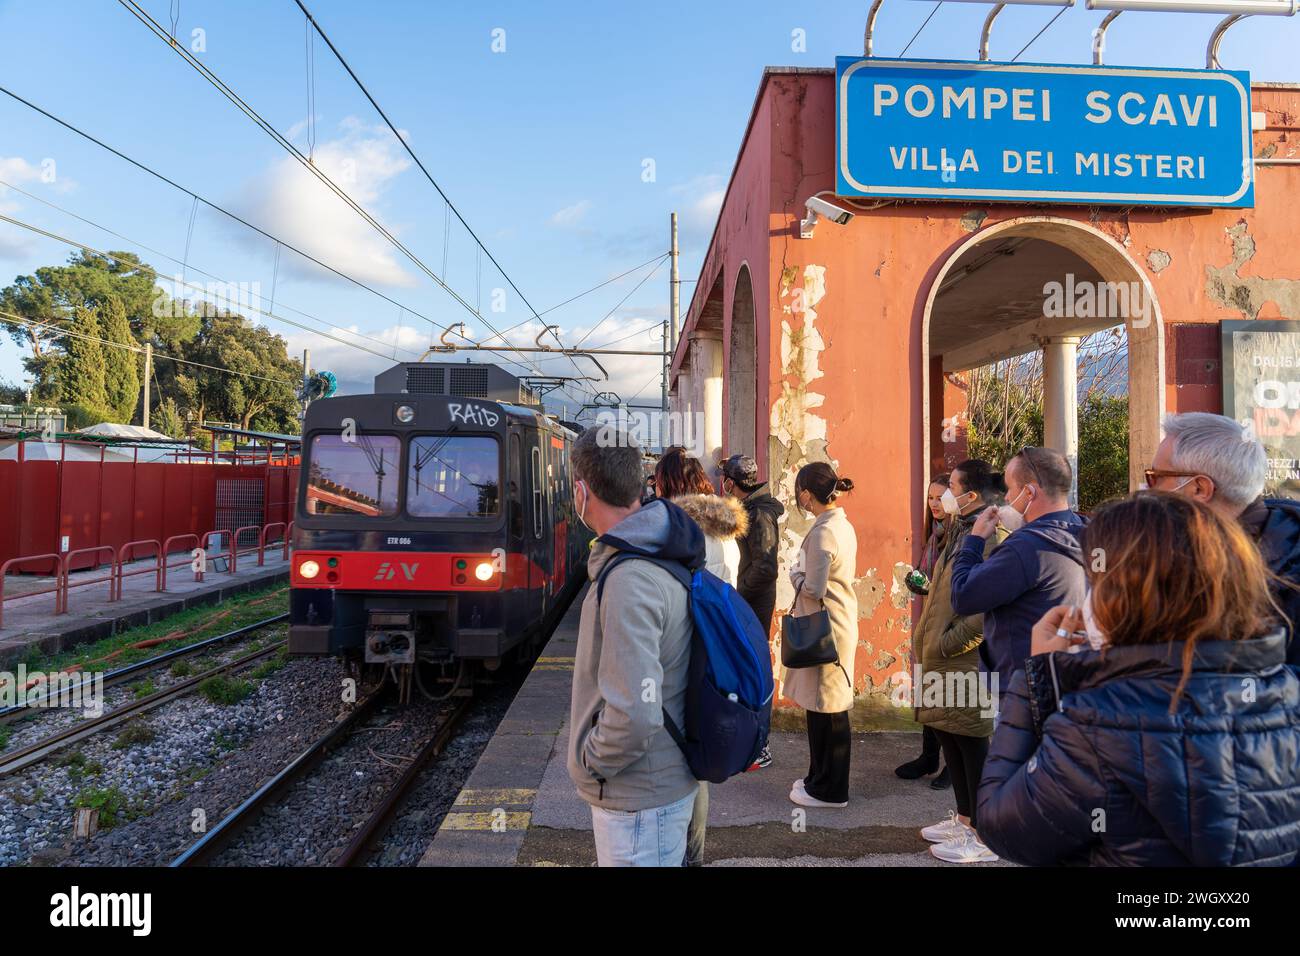 Pompeii passenger train station, mystery village in Italy with train arrival.pompei-napoles-italy Stock Photo